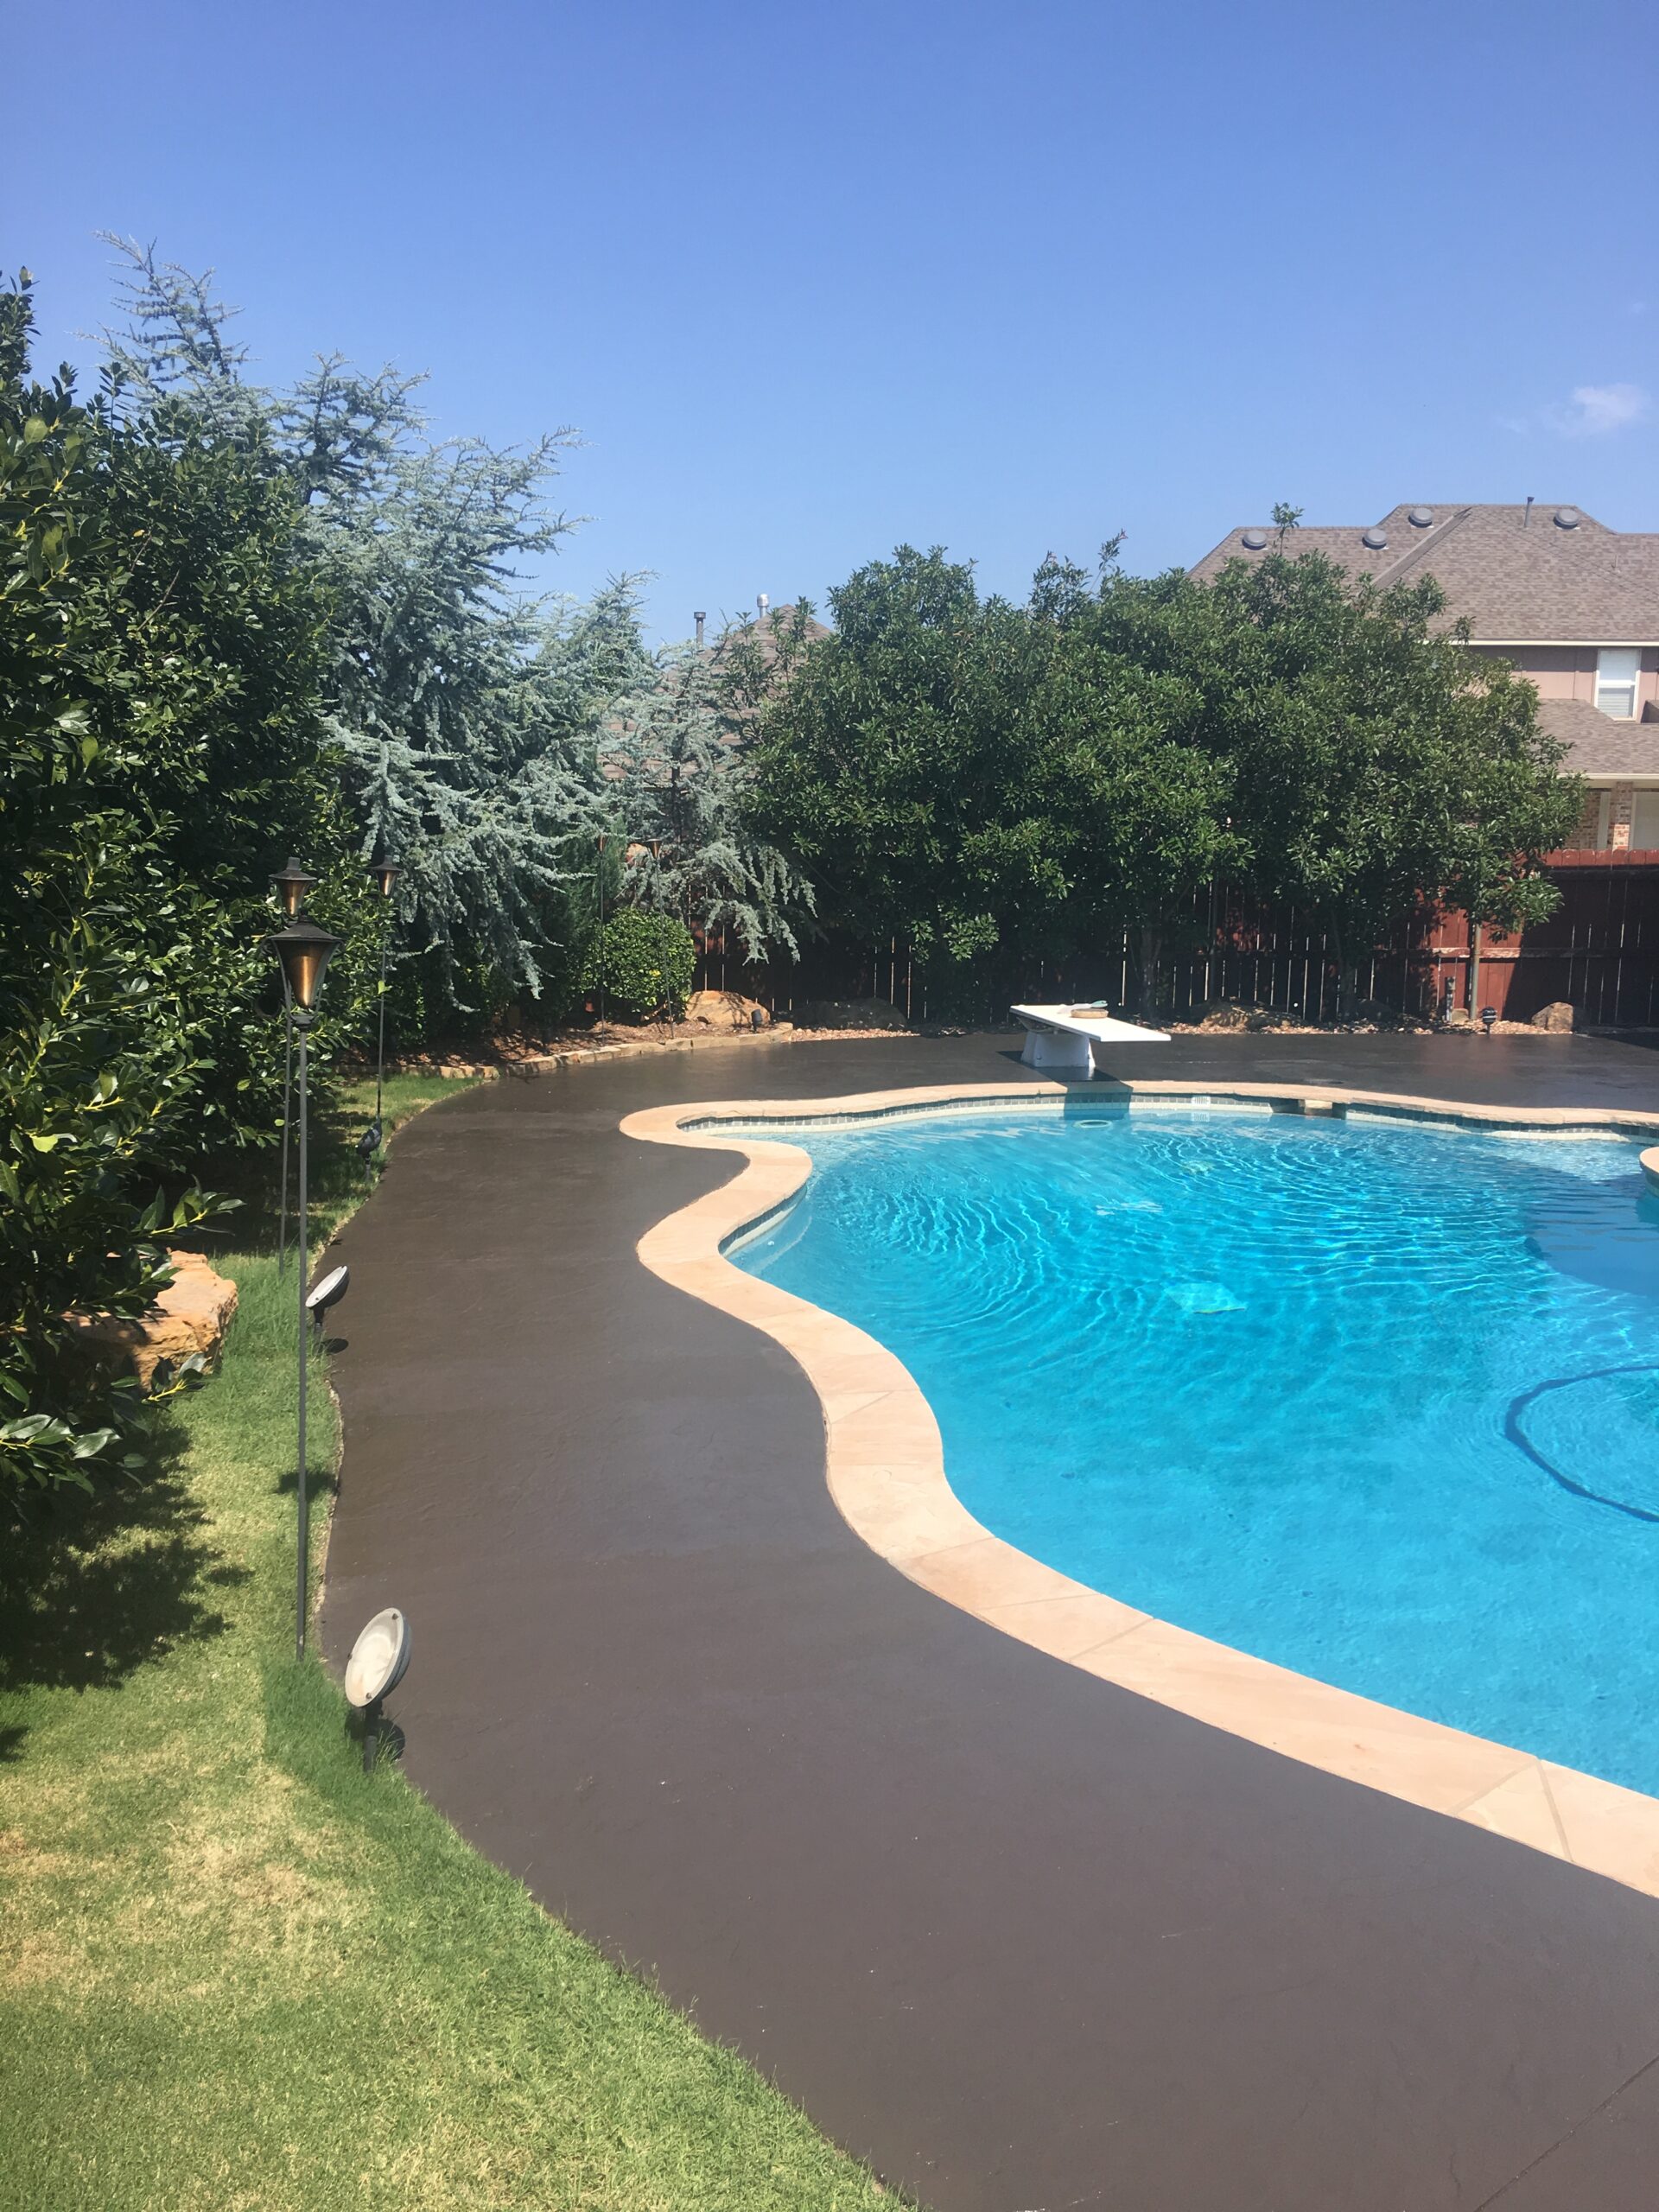 Rejuvenated pool deck after applying Resurface-It concrete overlay and Chocolate EasyTint